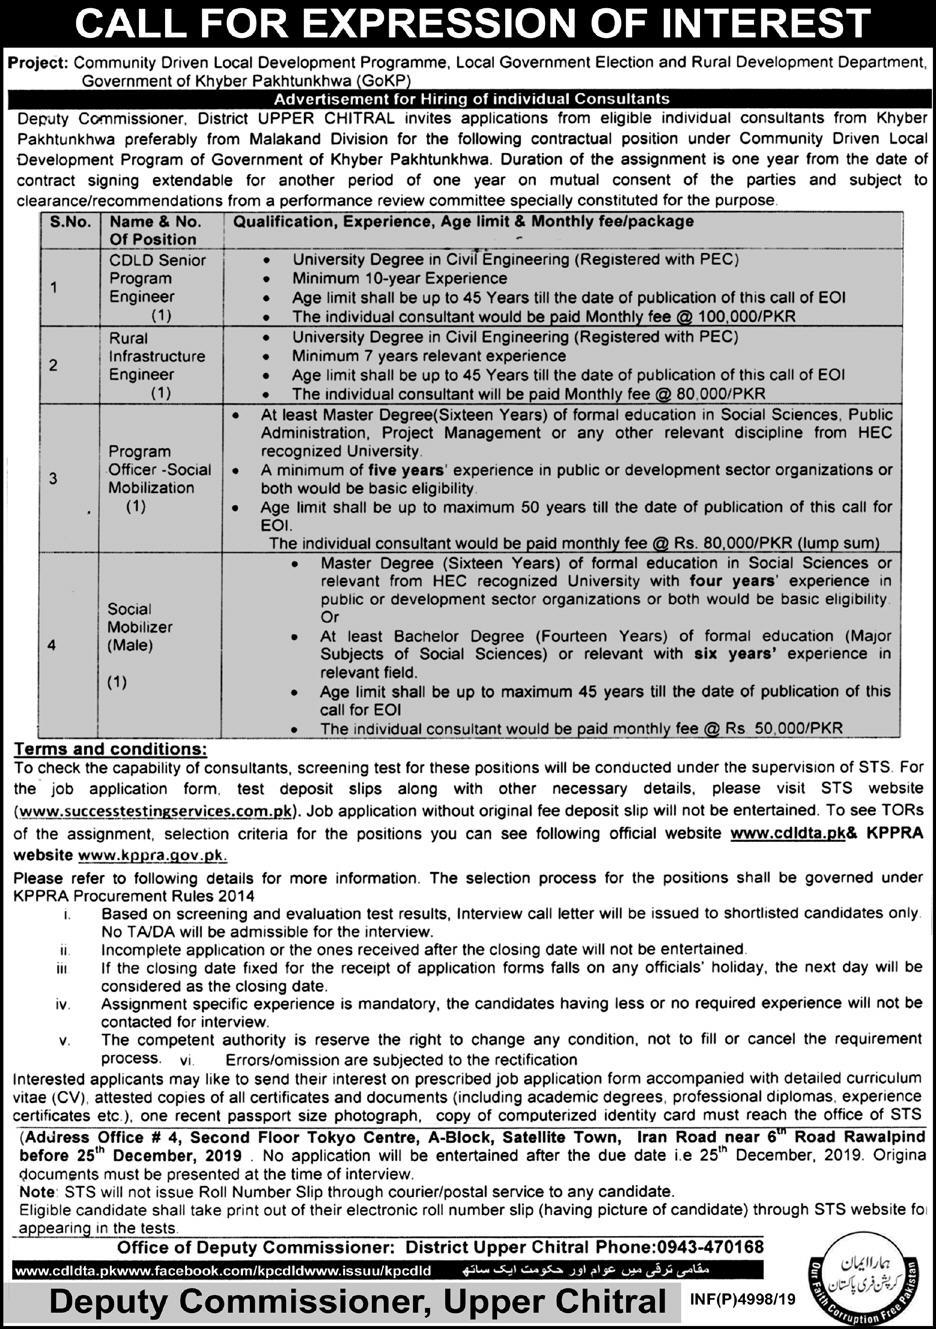 Jobs In Local Government Election And Rural Development Department 06 December 2019